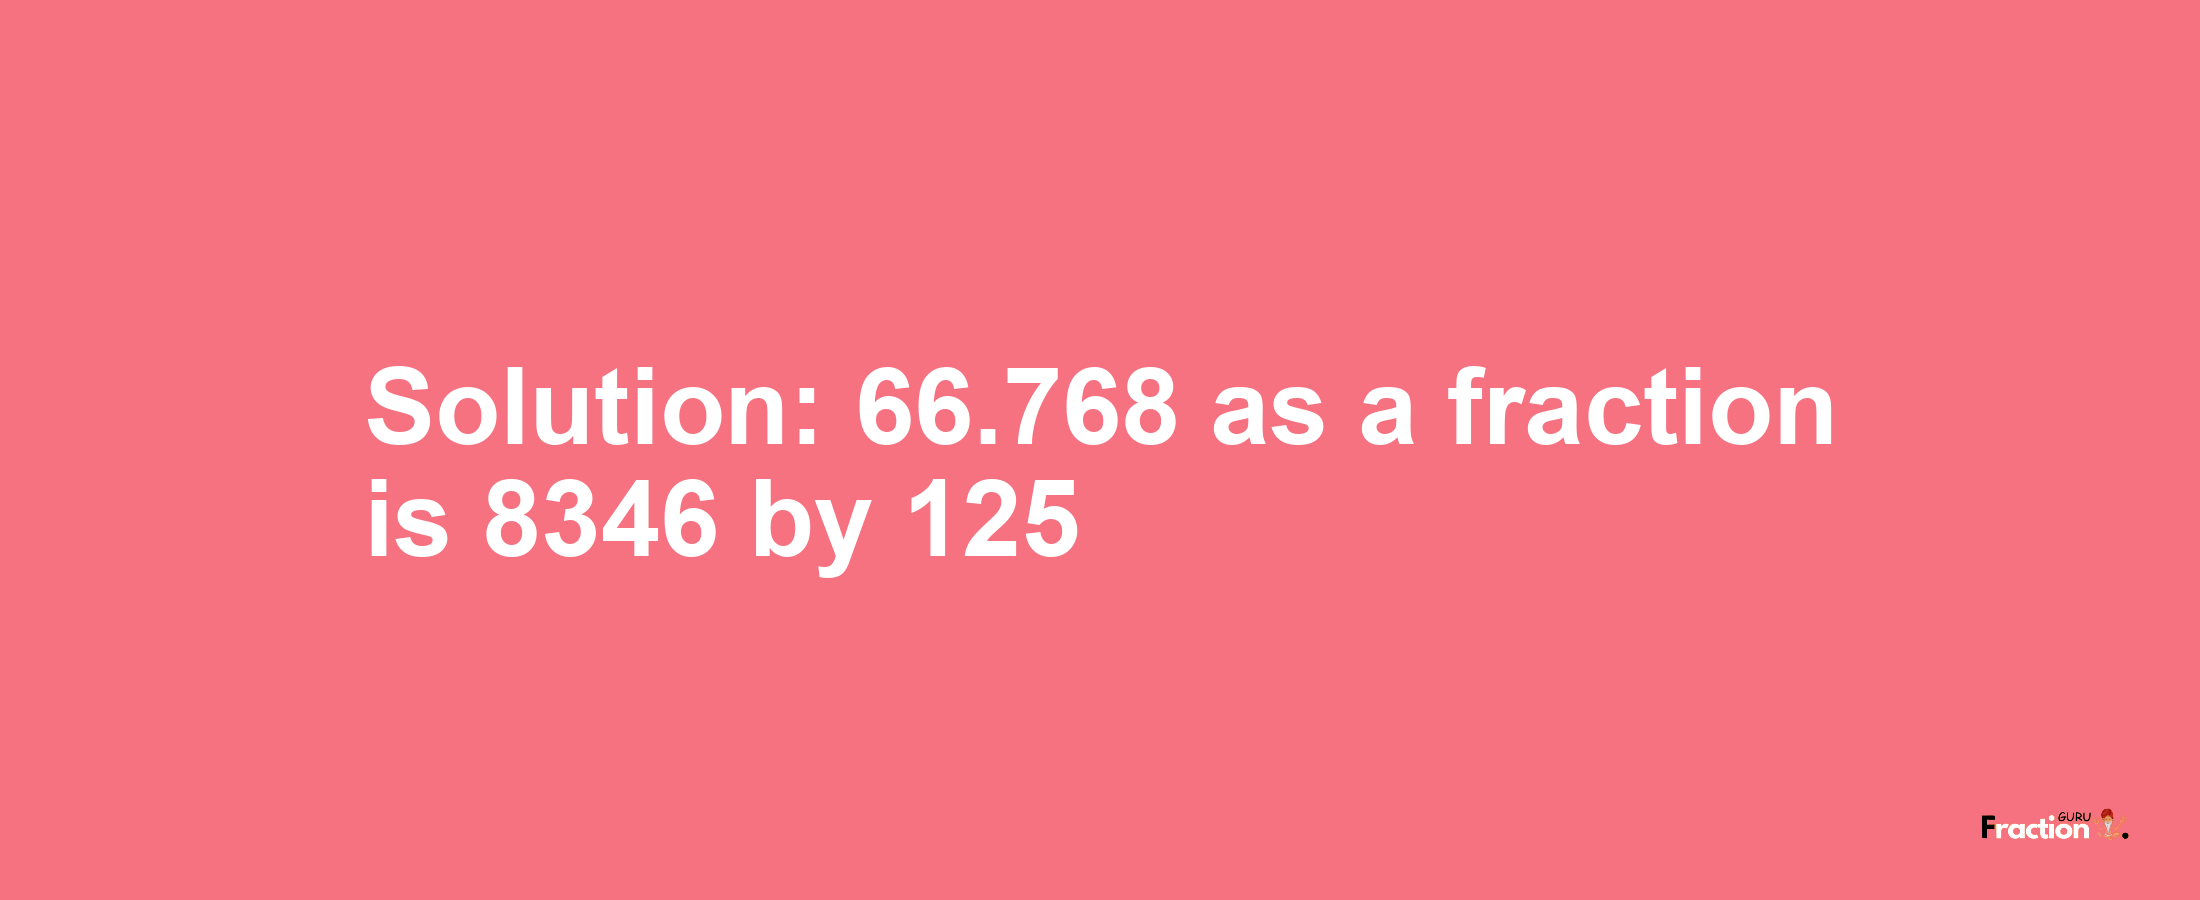 Solution:66.768 as a fraction is 8346/125